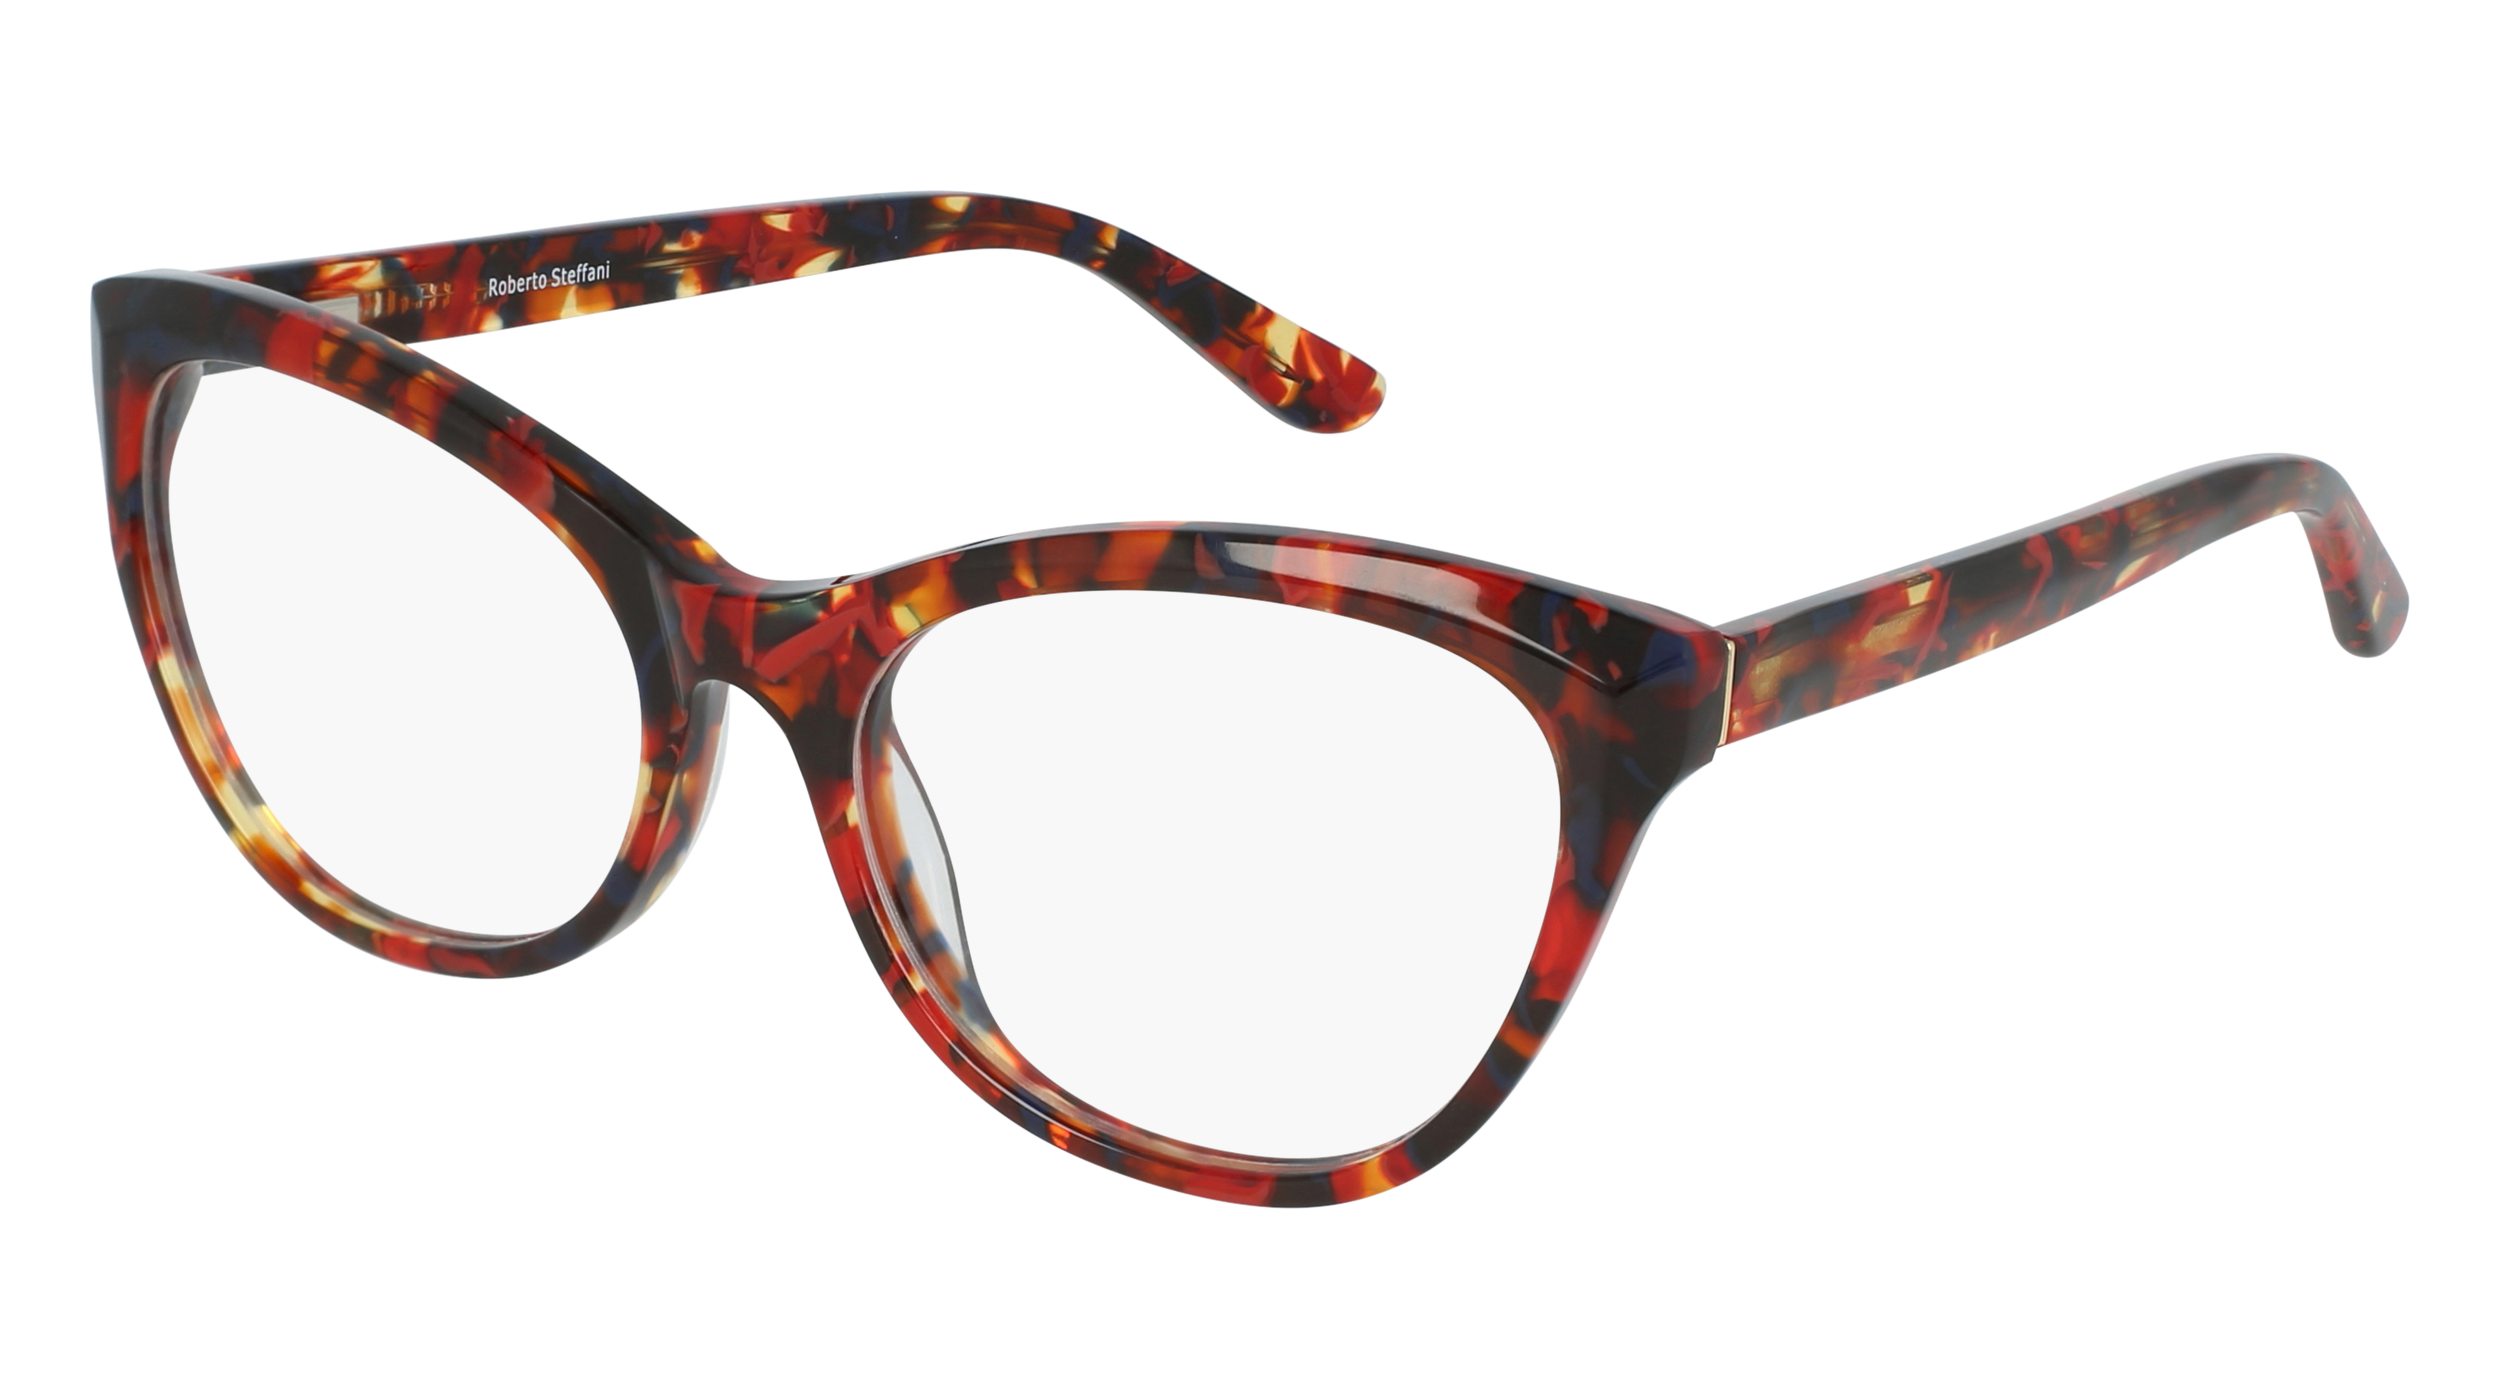 R RS 157 women's eyeglasses (from the side)